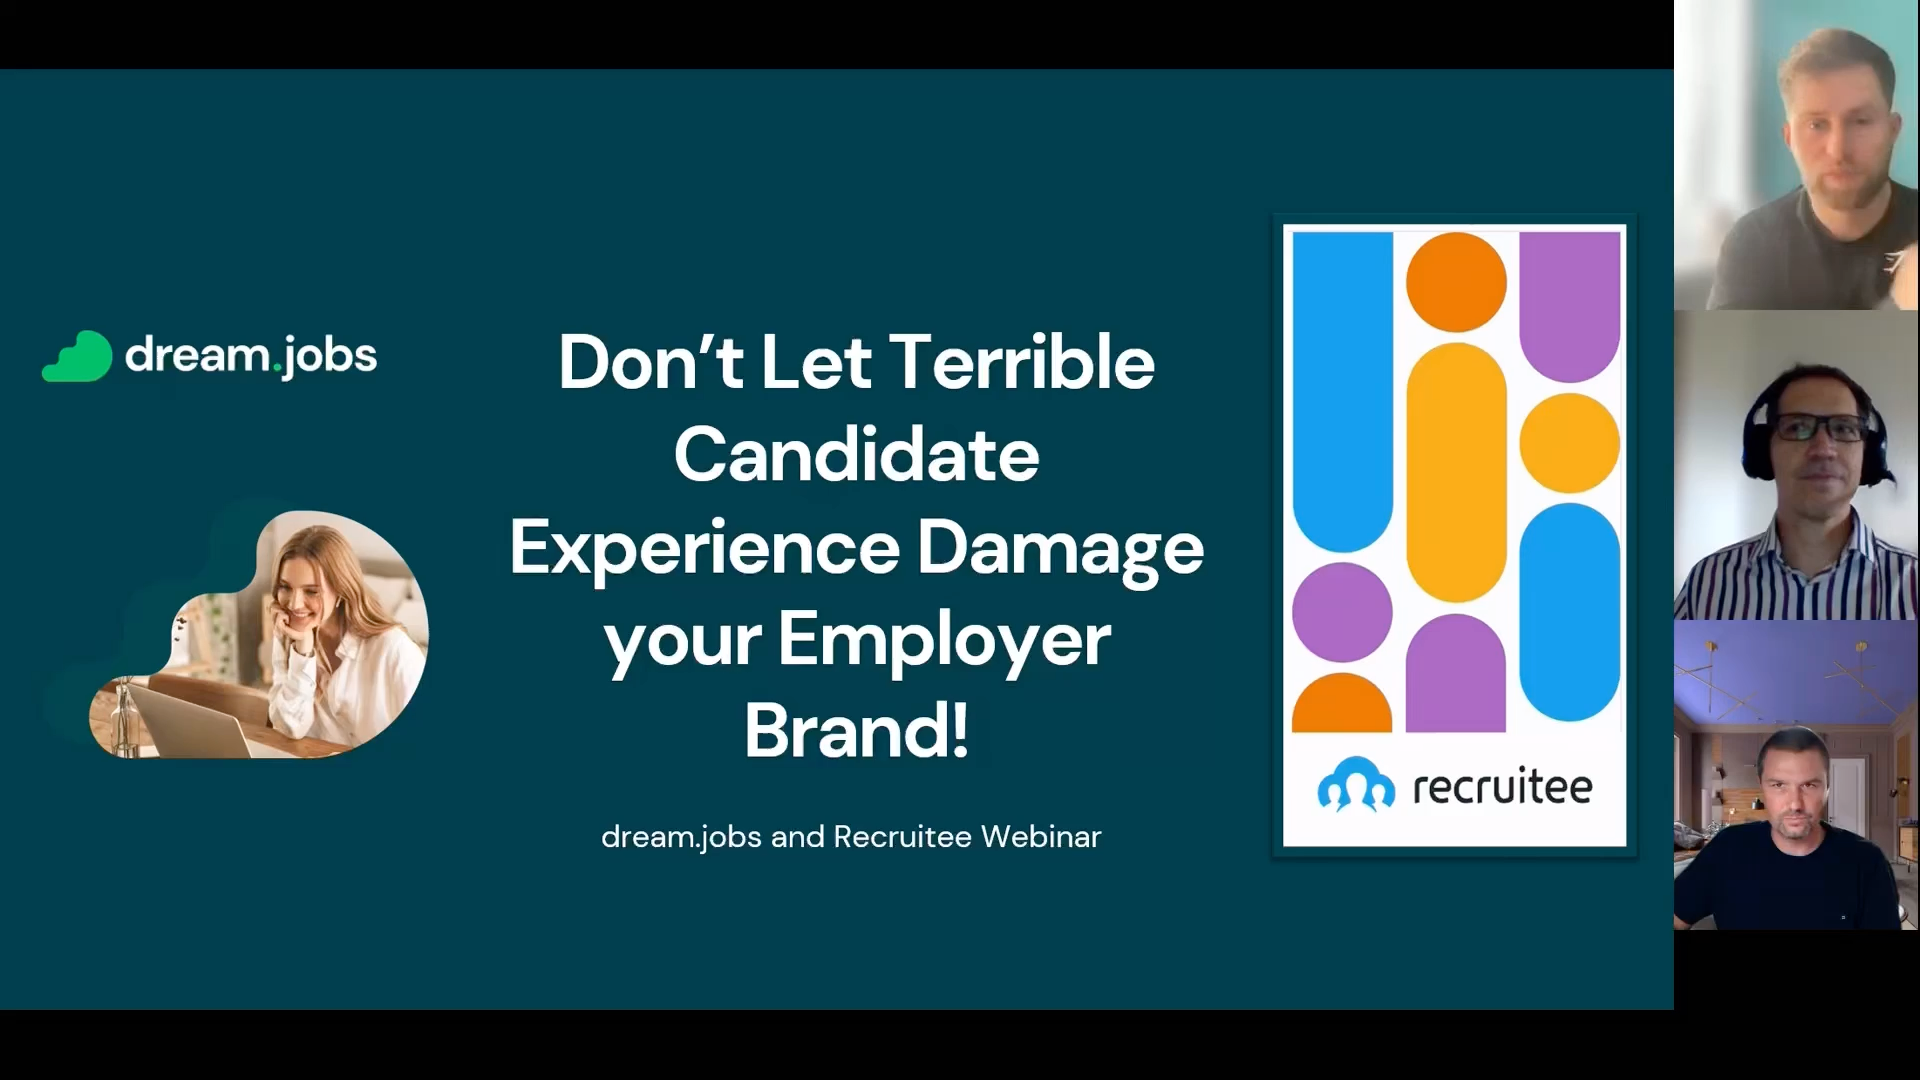 Don’t Let Terrible Candidate Experience Damage your Employer Brand!